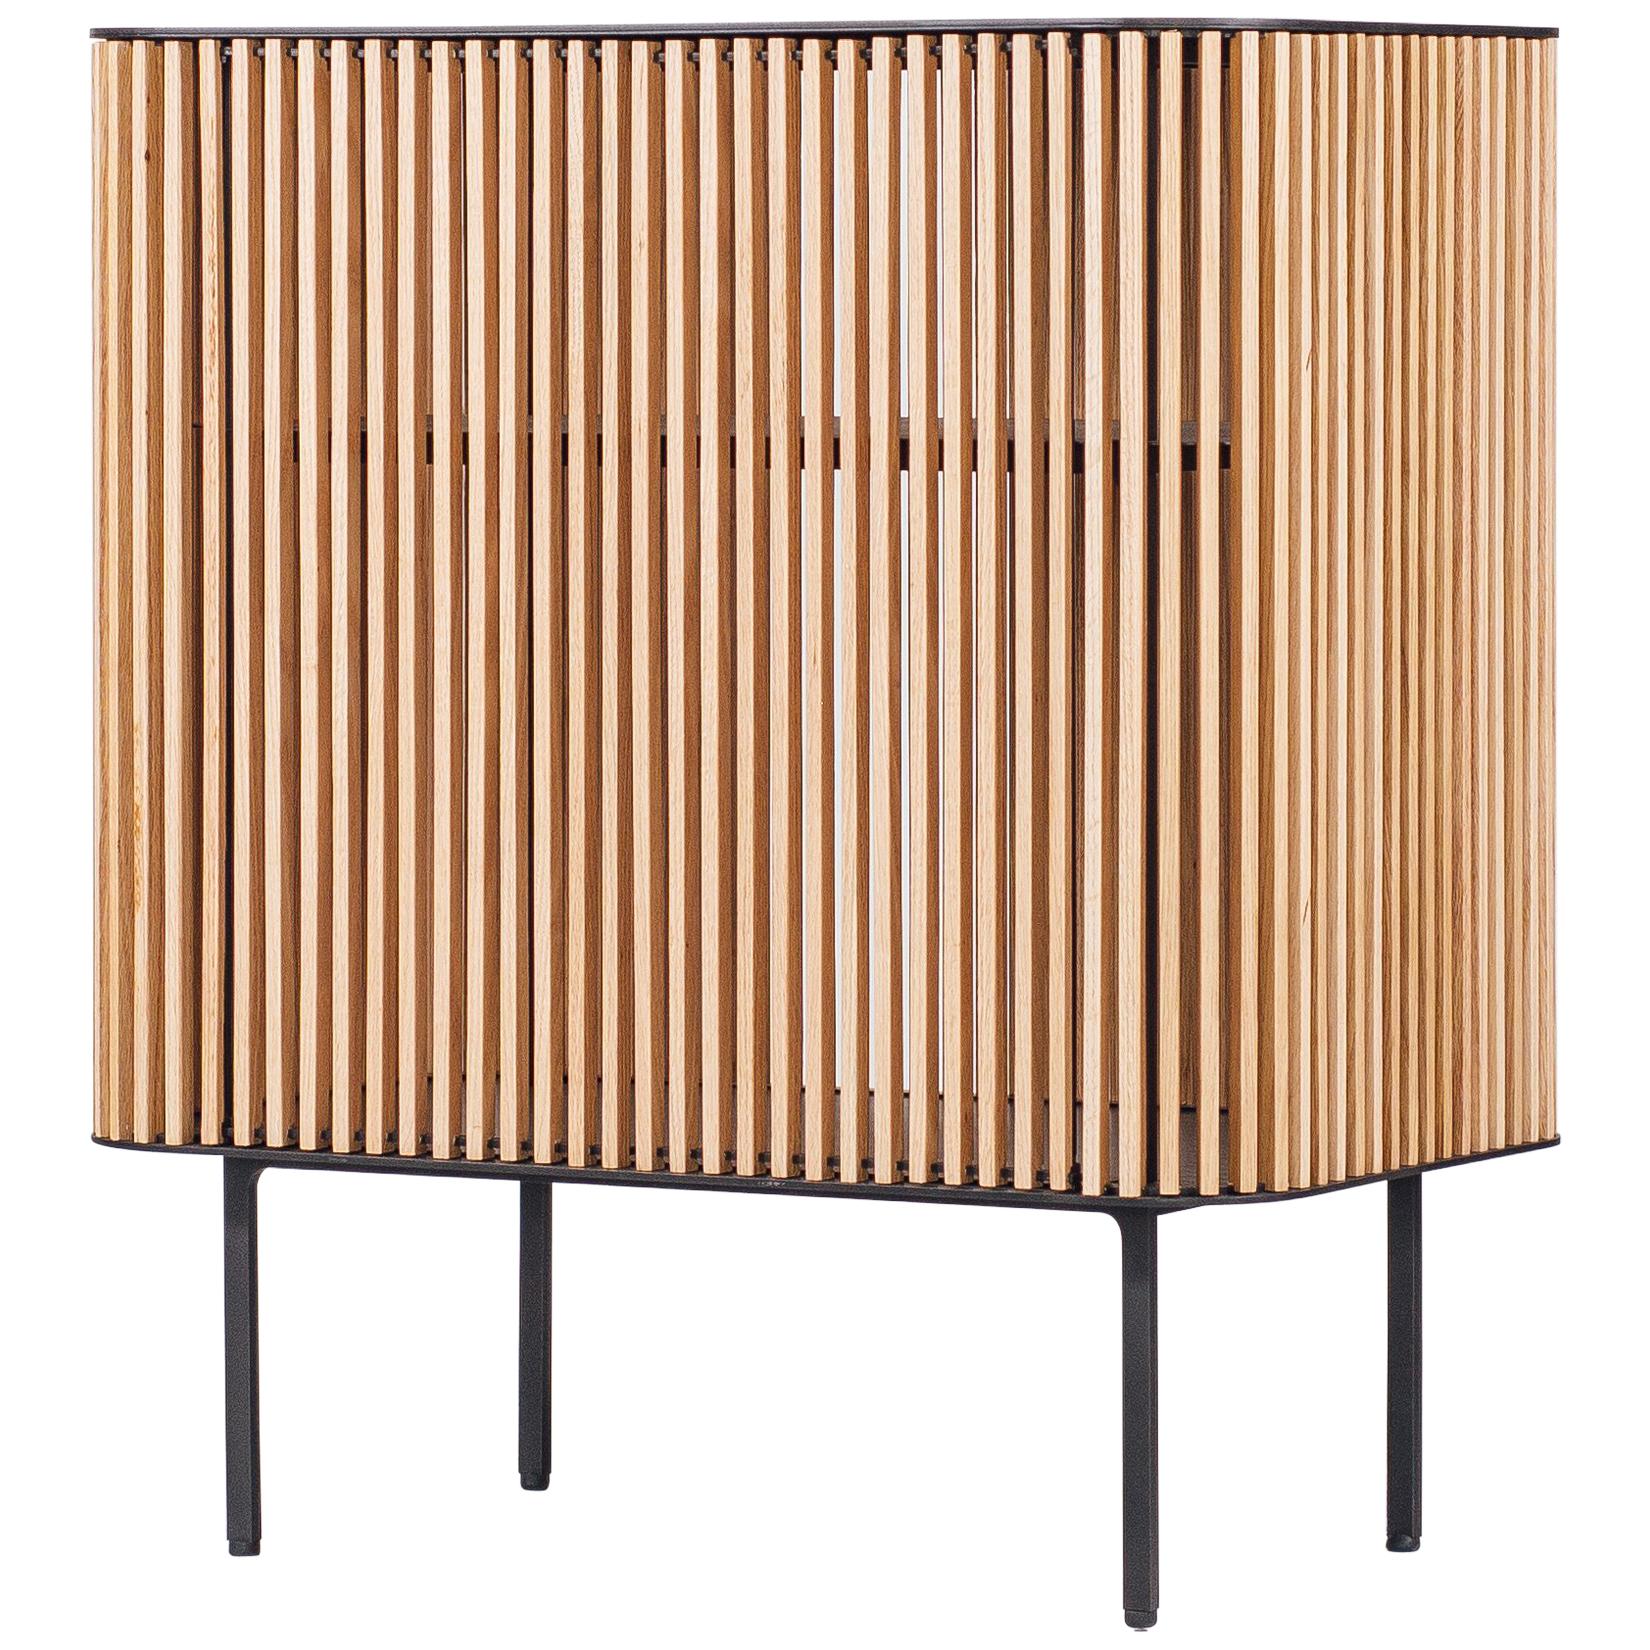 Dry Bar in Blackened Laser-Cut Steel Frame with Oak Slats and Leather Top